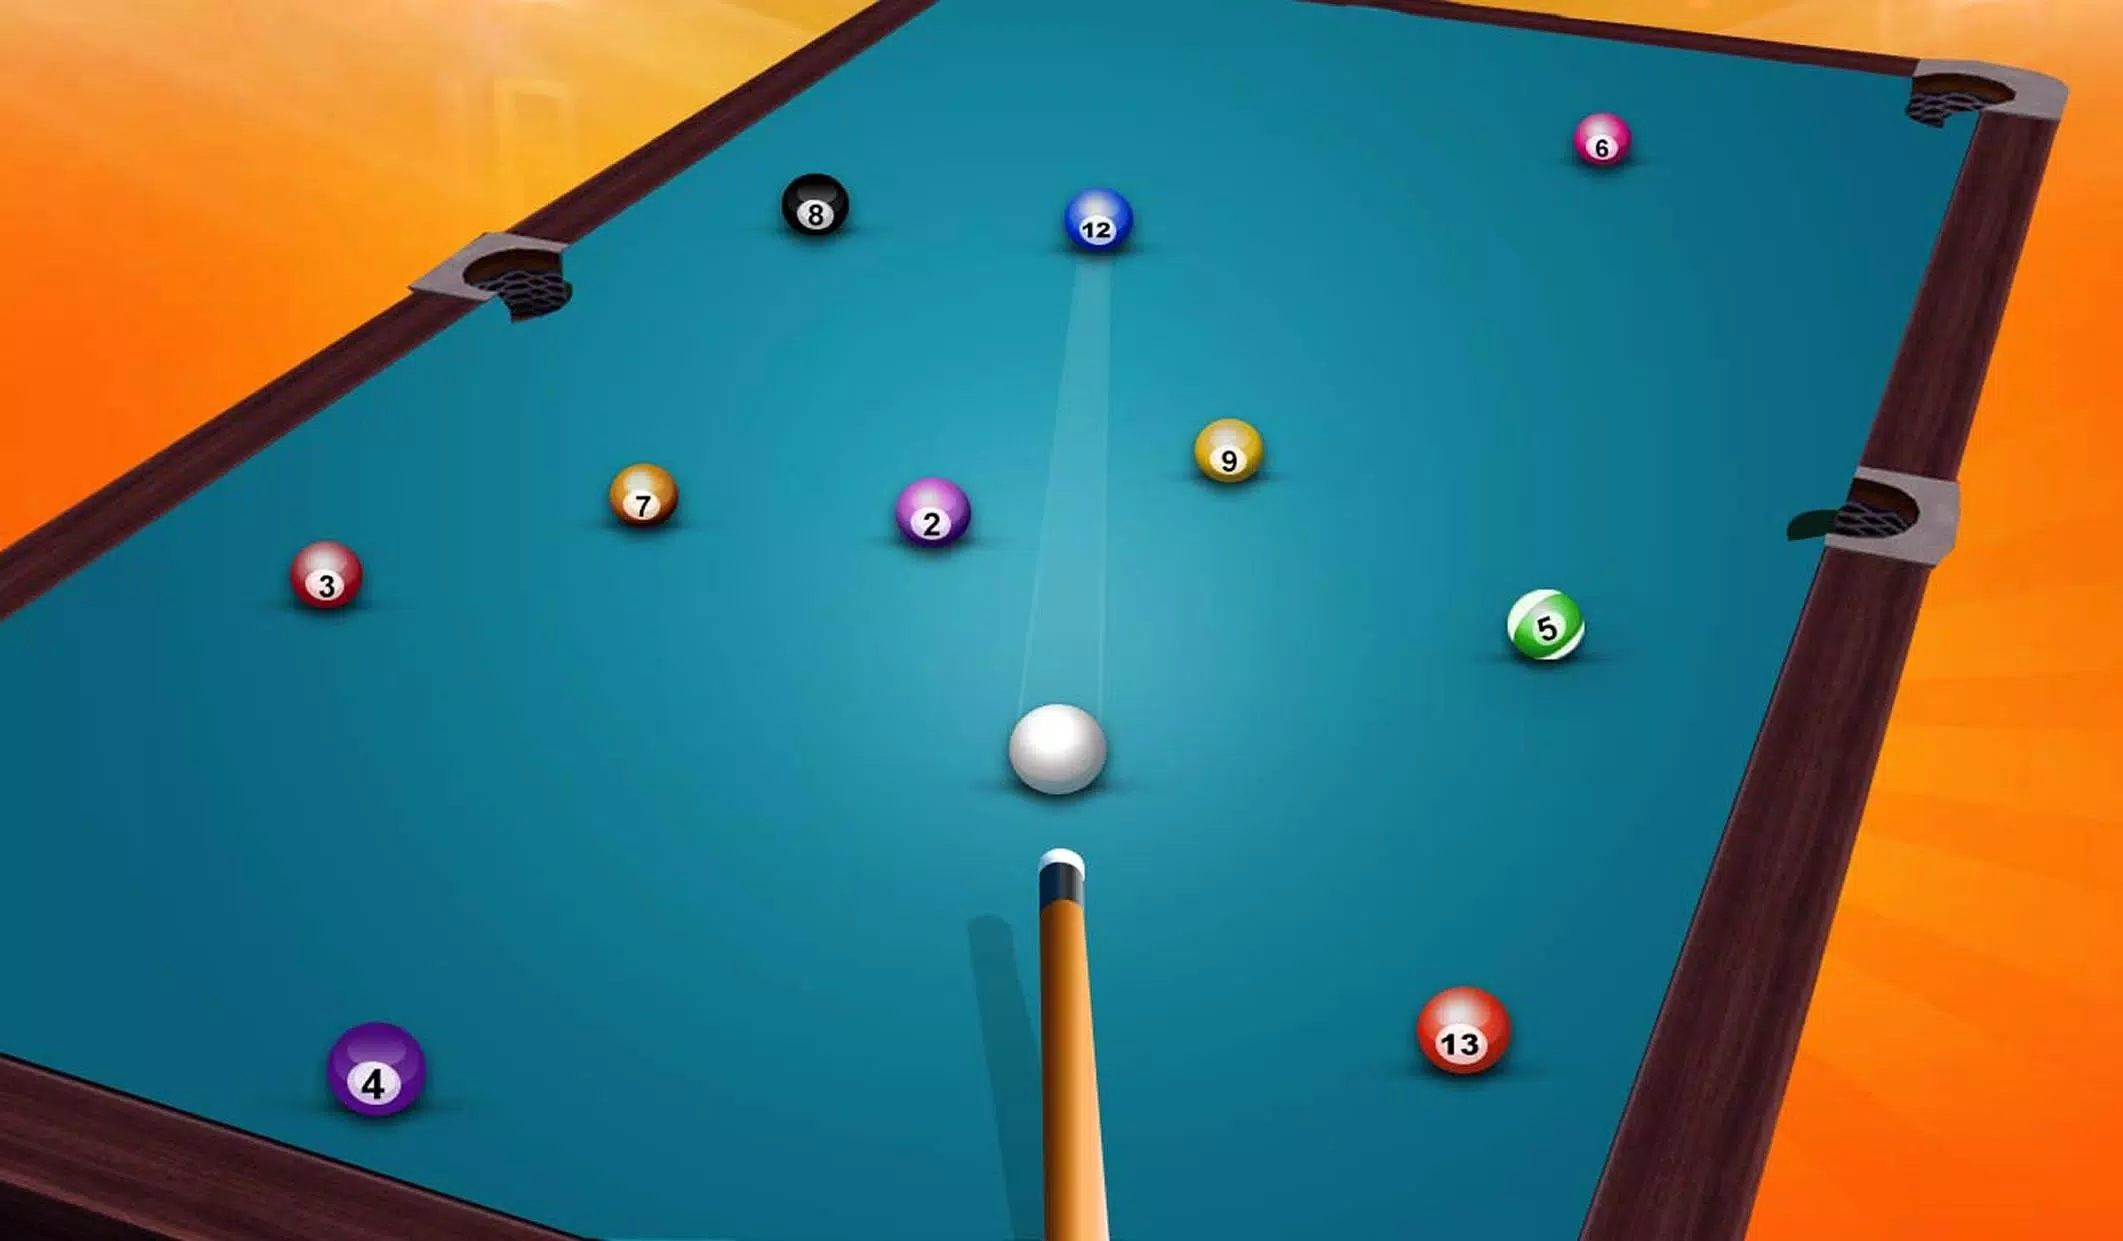 SwanDive: Fun Billiards 8 Pool Online Multiplayer for Android - APK Download